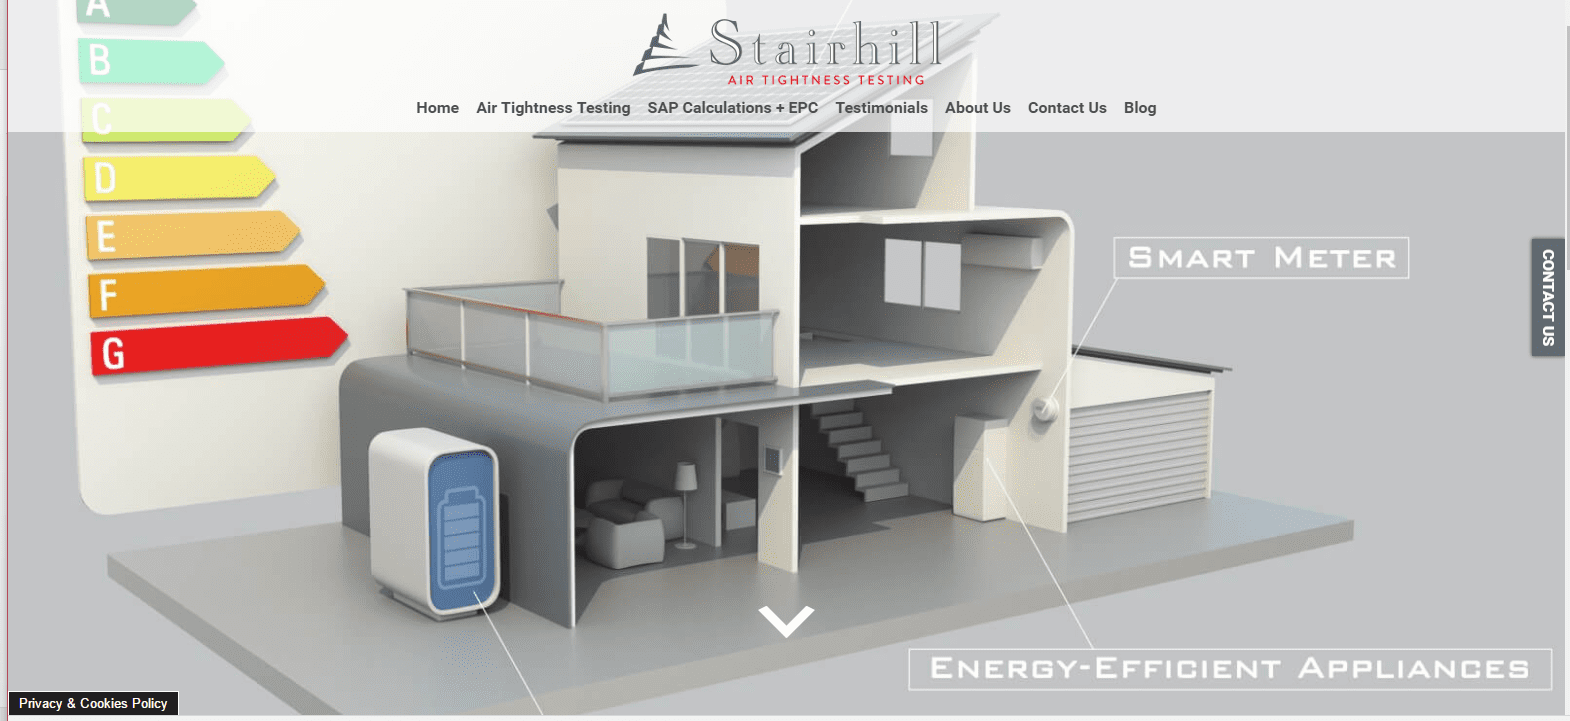 Stairhill new website by Corrie D Marketing